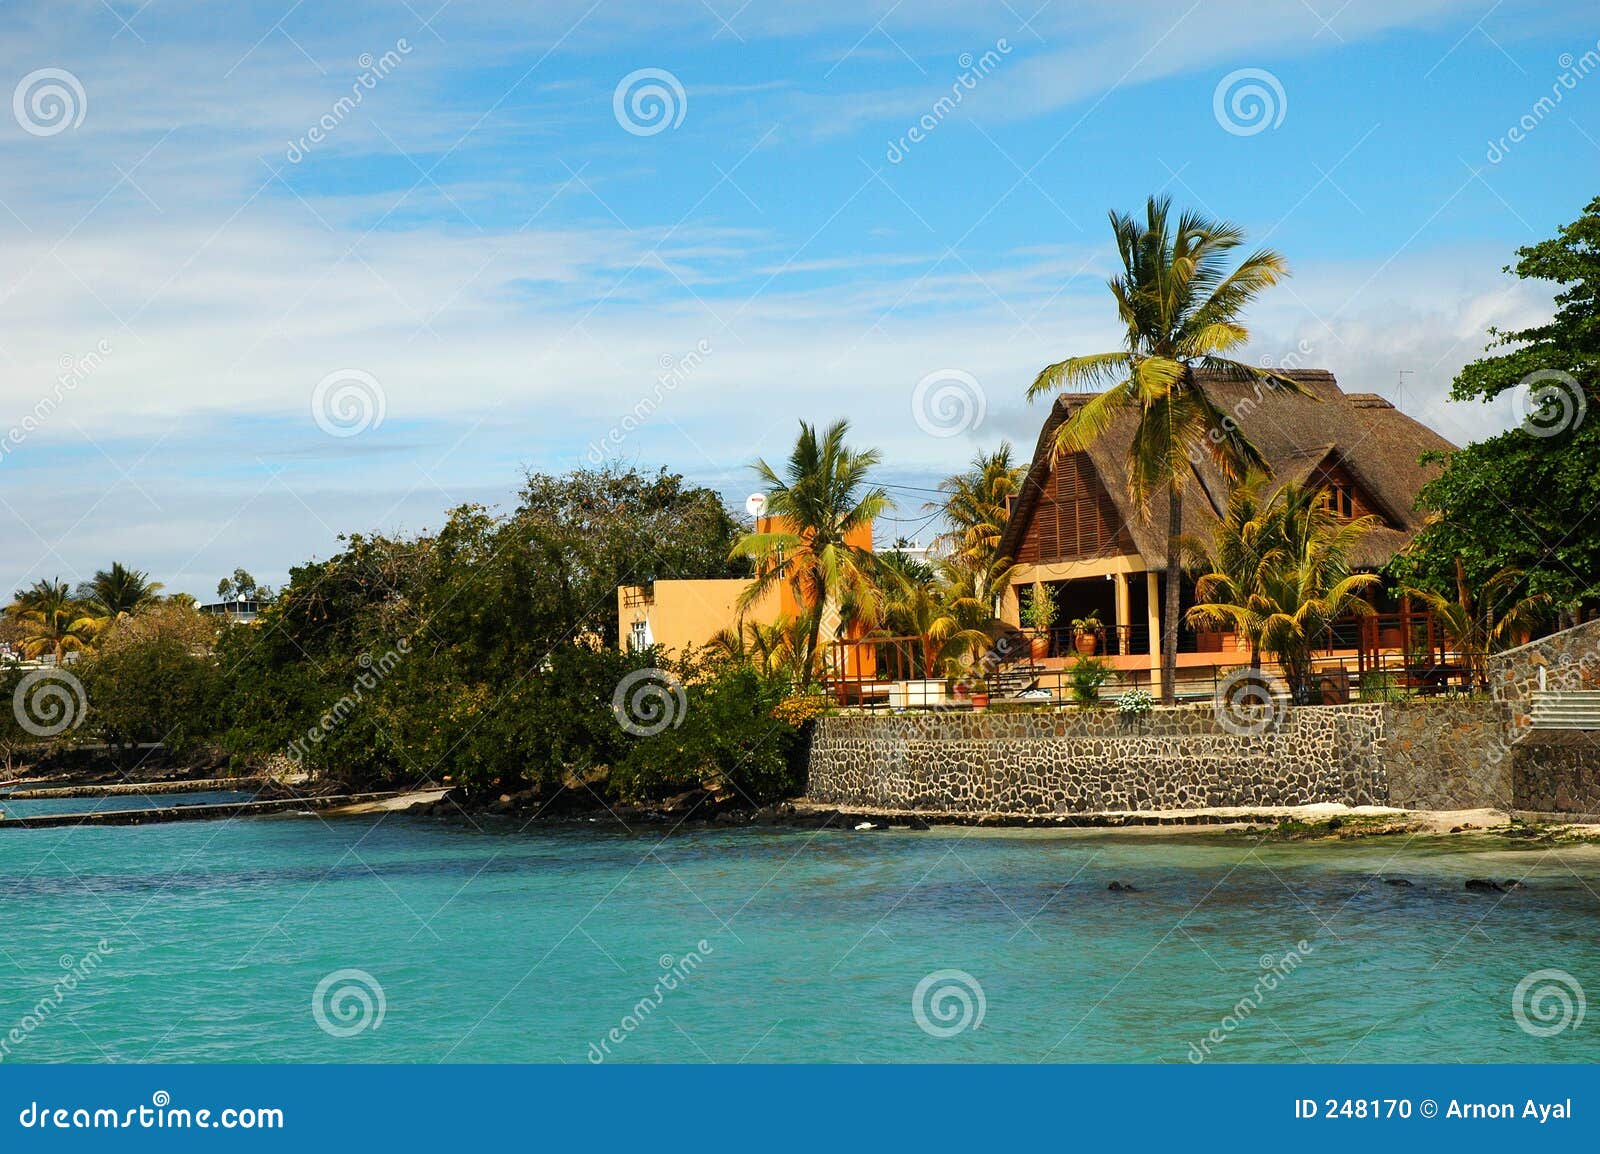 Beach cabin stock photo Image of coast holiday clear 